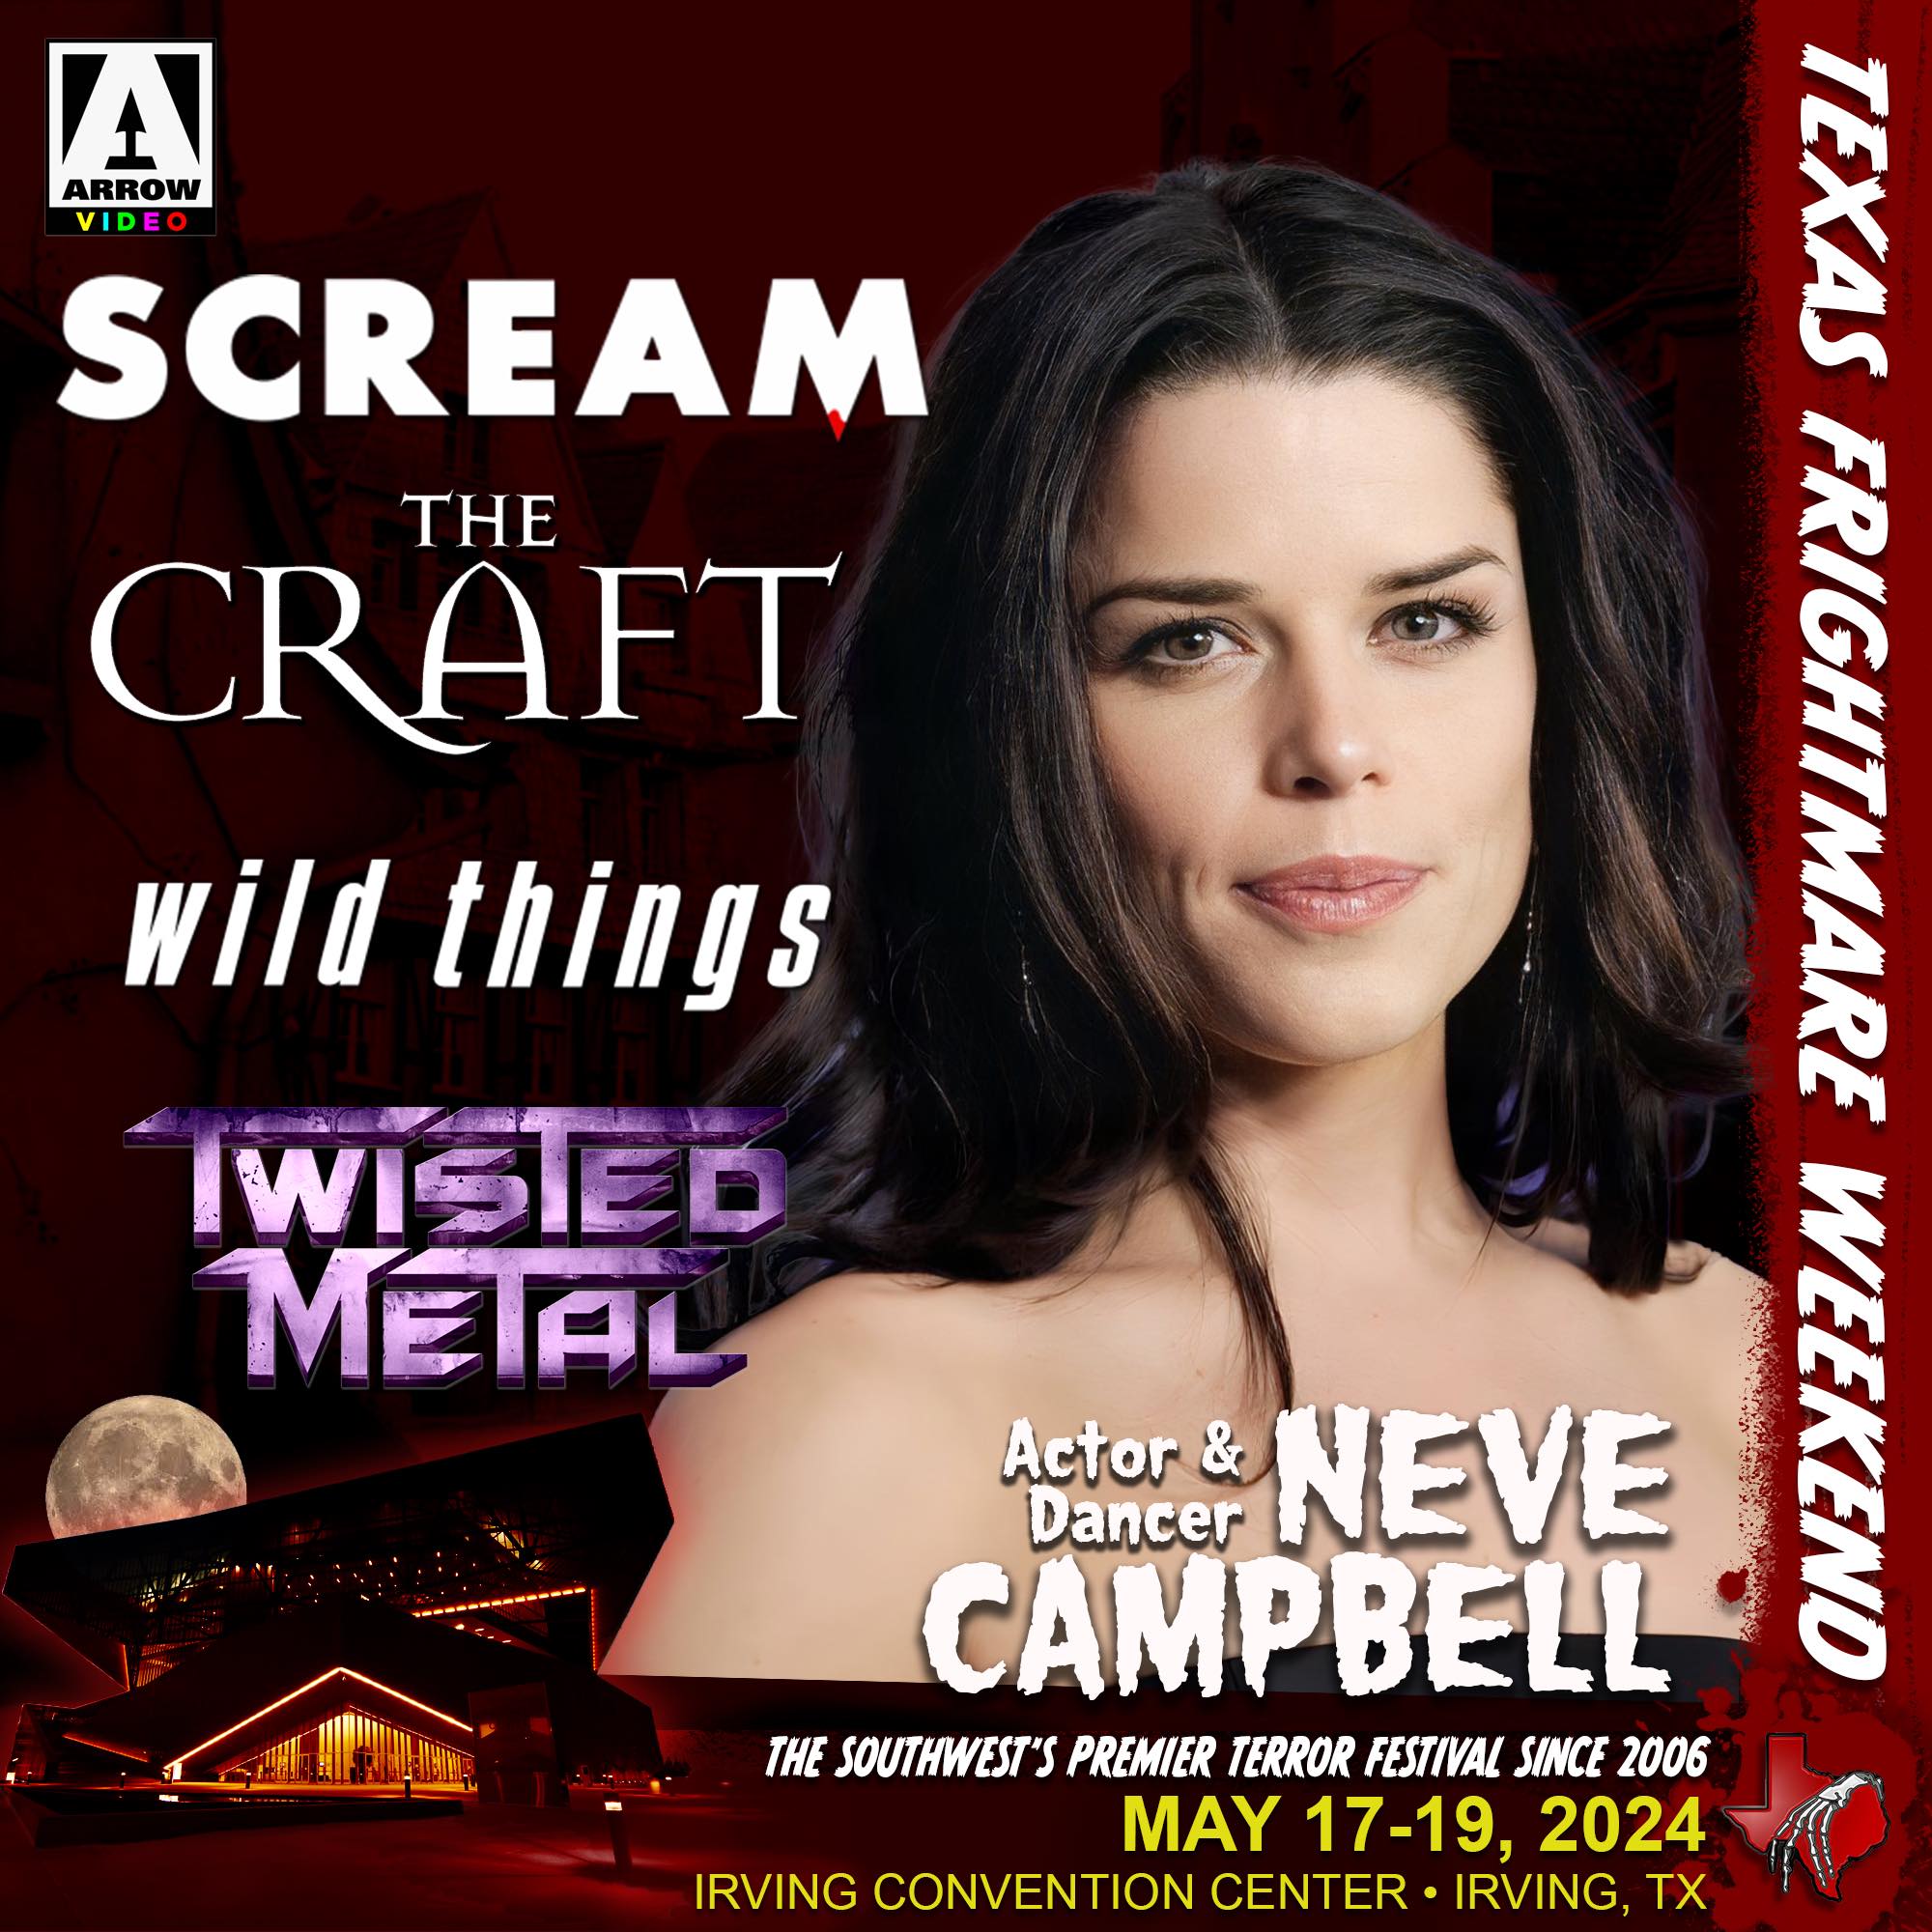 Meet Neve Campbell at Texas Frightmare Weekend in Dallas